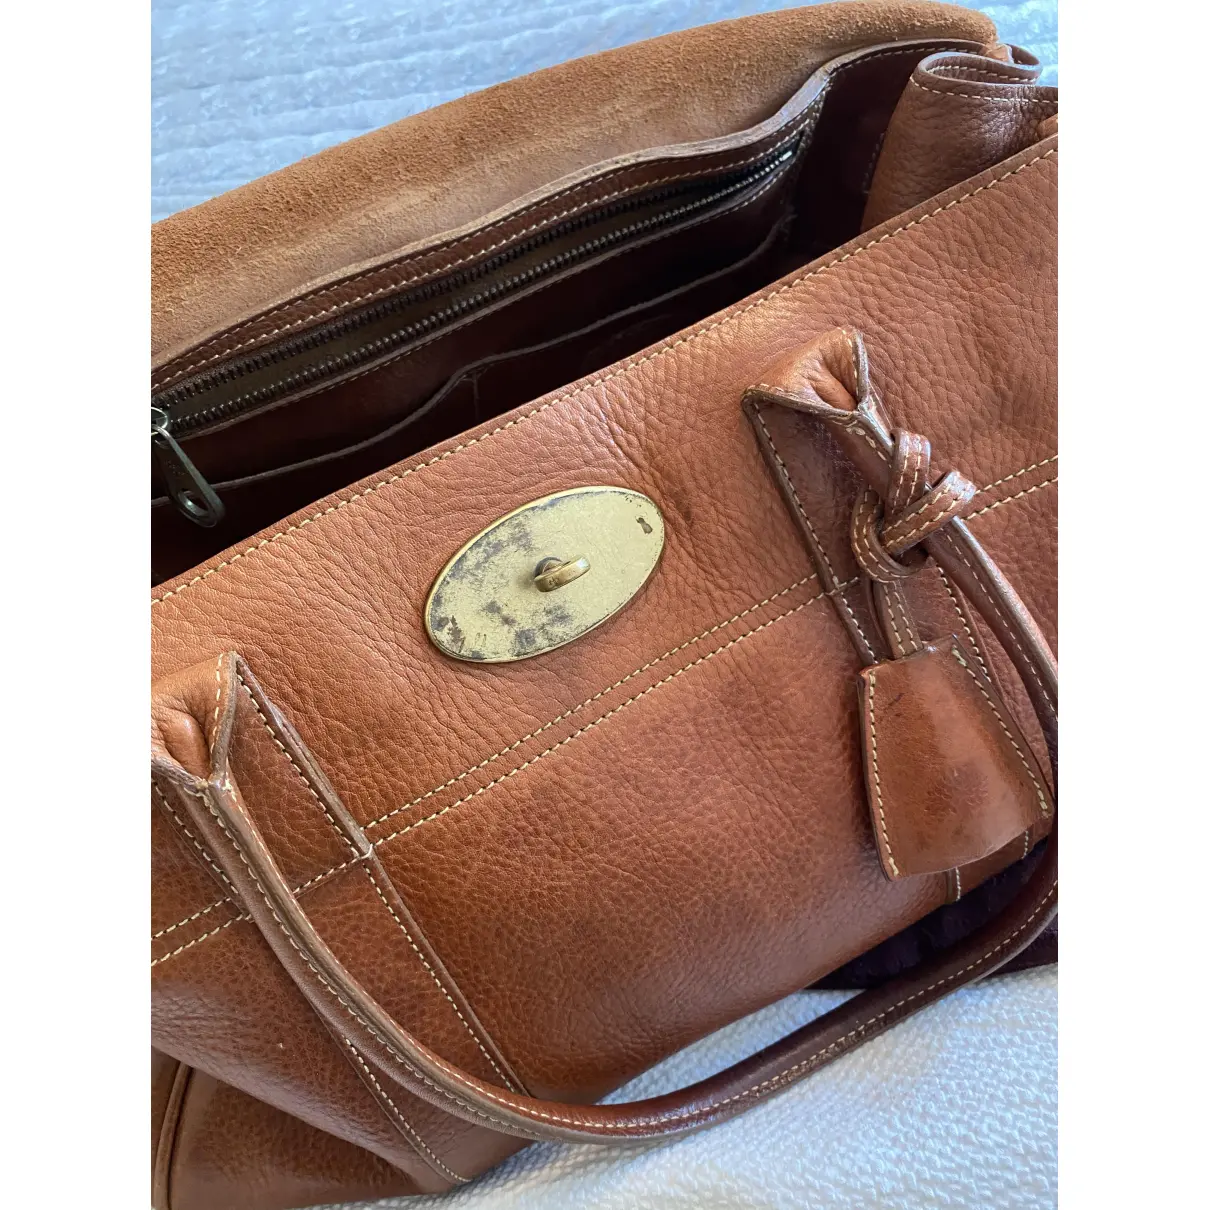 Bayswater leather bag Mulberry